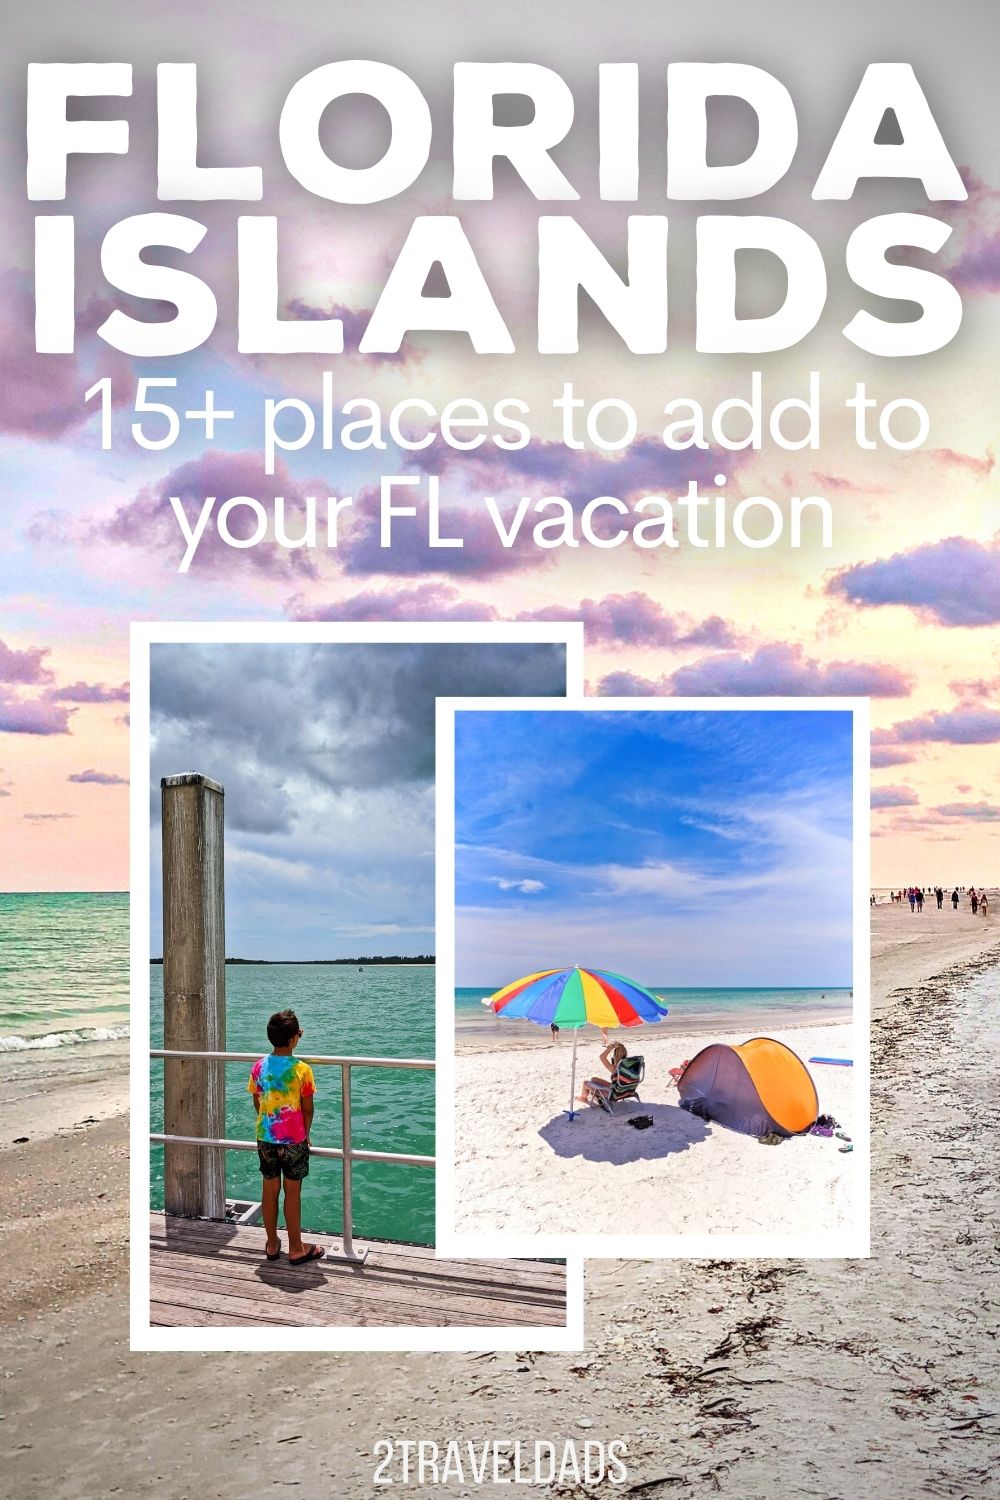 There are so many wonderful islands in Florida to visit, but how do you choose? We've picked 15+ islands all around the state that AREN'T the Florida Keys that are wonderful for a vacation or day trip.